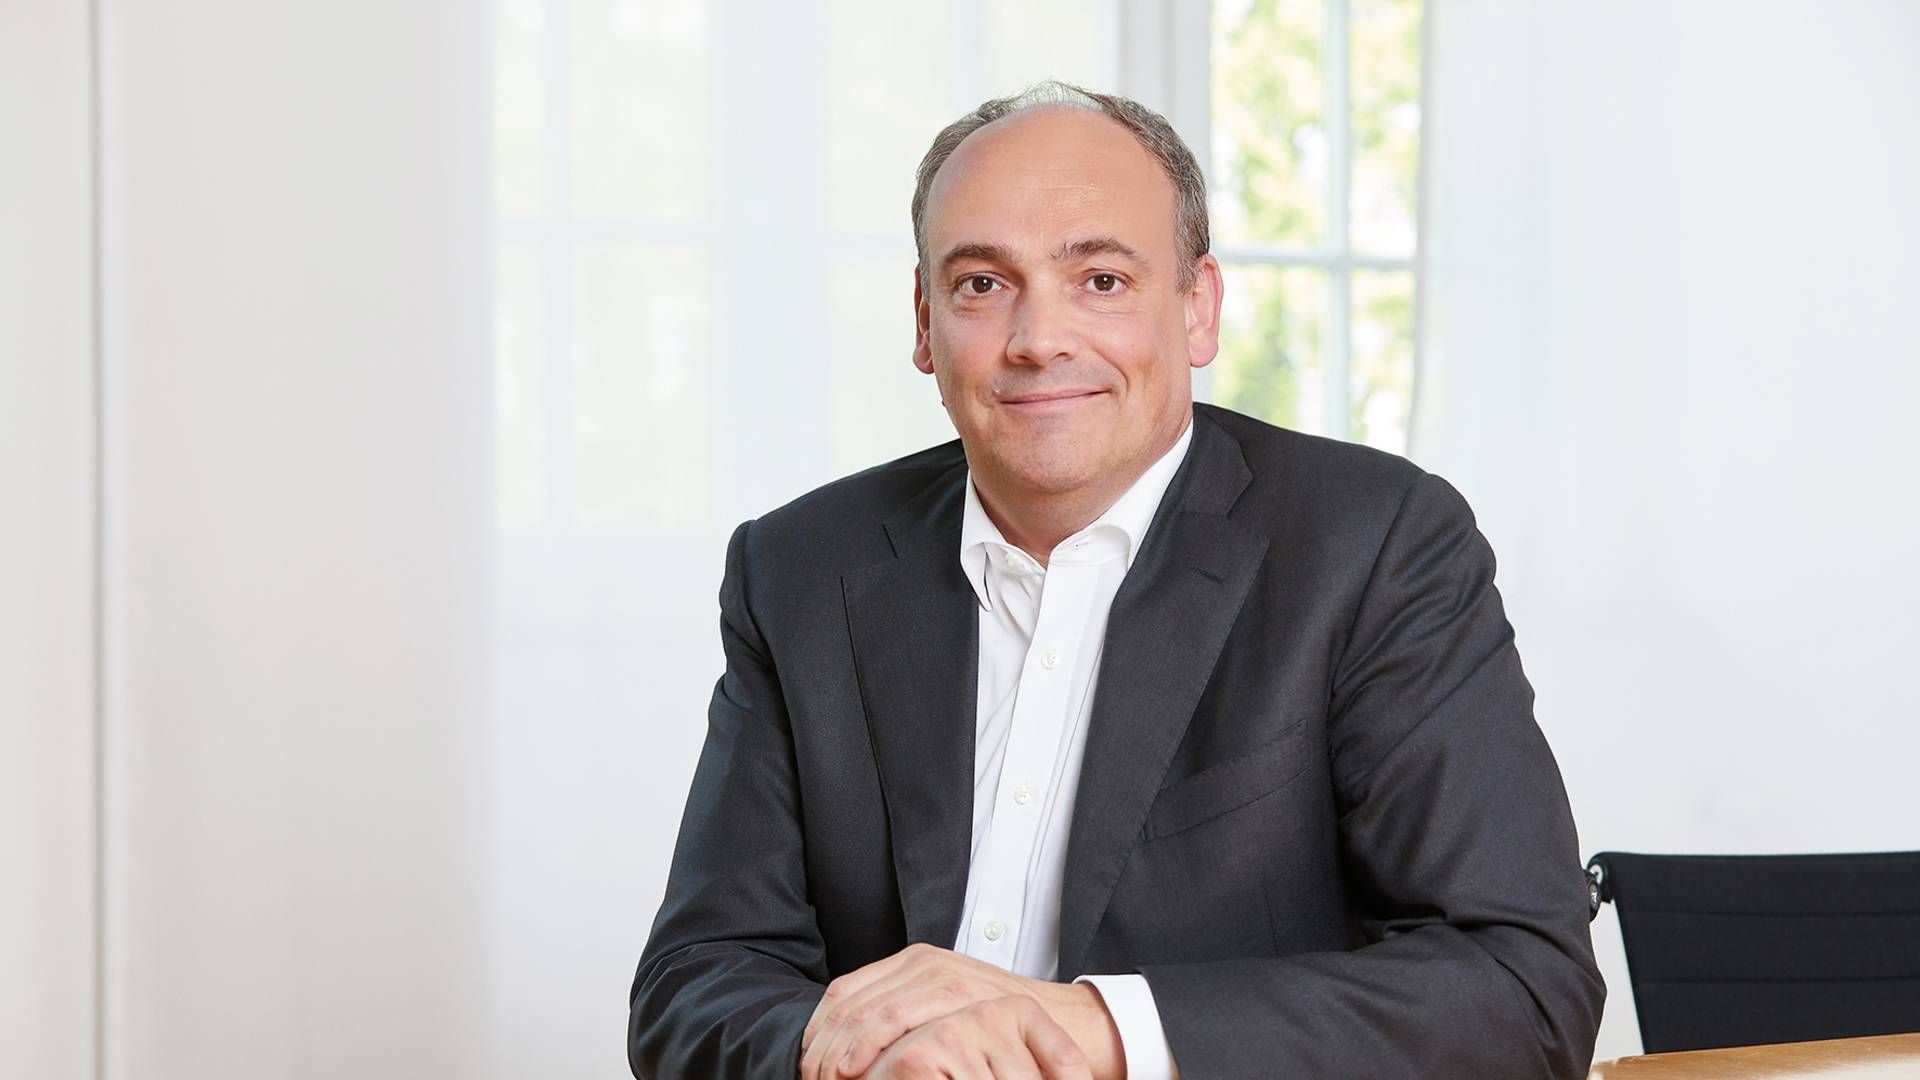 ”If I look at the market right now towards the end of the year – and in run-up to the Chinese New Year – I think we see a little bit of recovery in demand,” says Rolf Habben Jansen, CEO of Hapag-Lloyd. | Photo: PR / Hapag-Lloyd